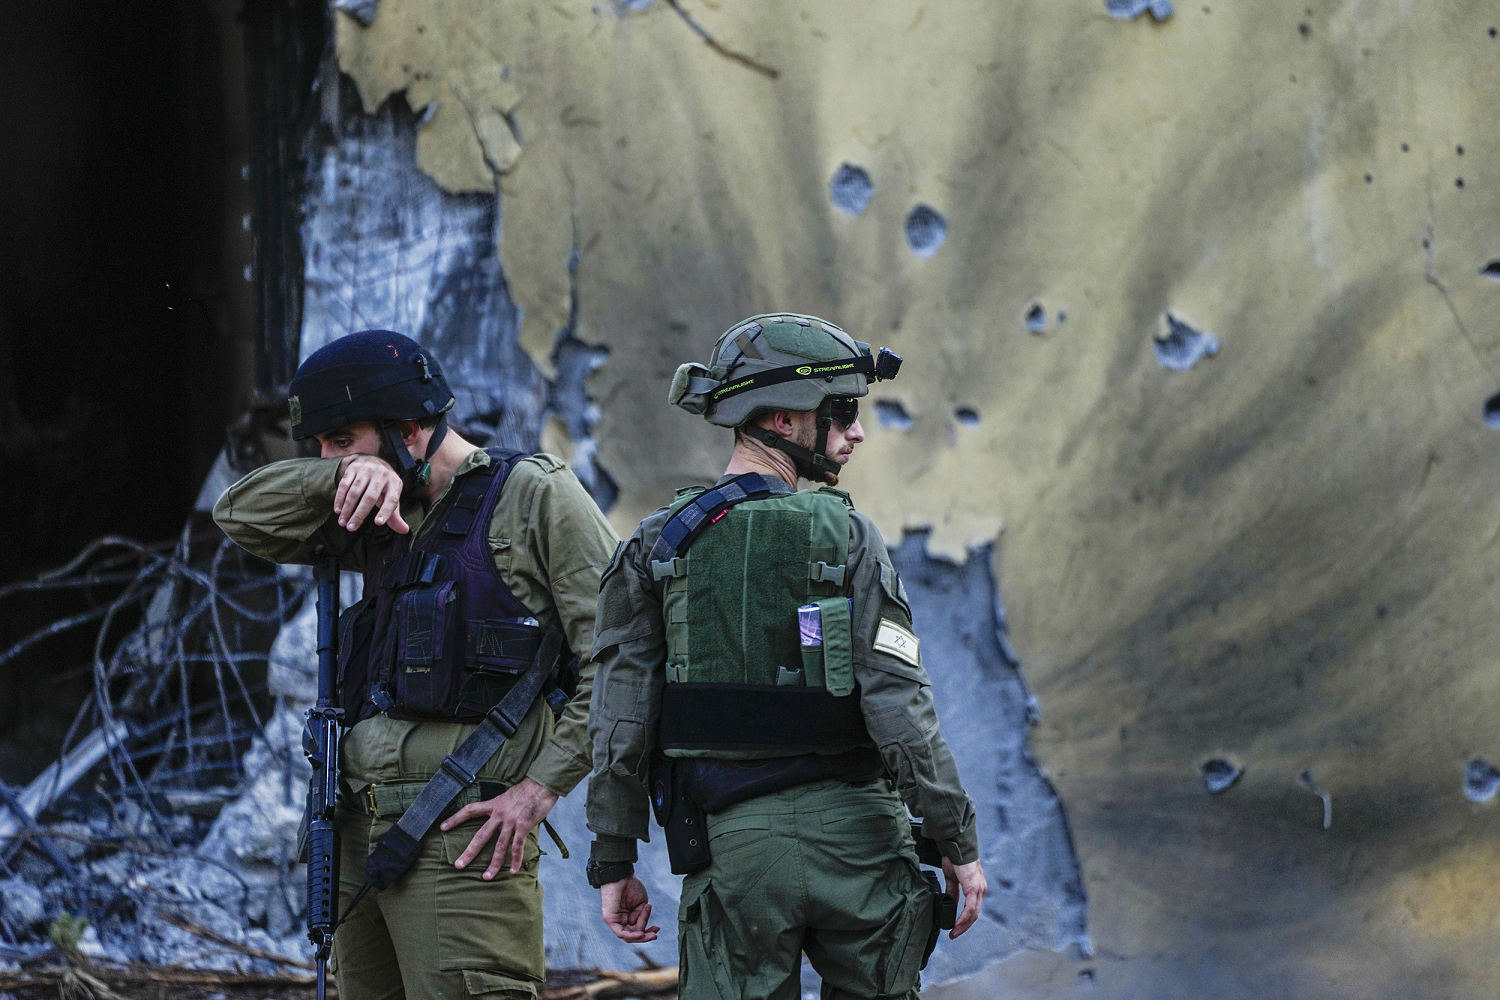 Israeli military abandoned kibbutz for hours during Hamas' attack Oct. 7, IDF inquiry finds 